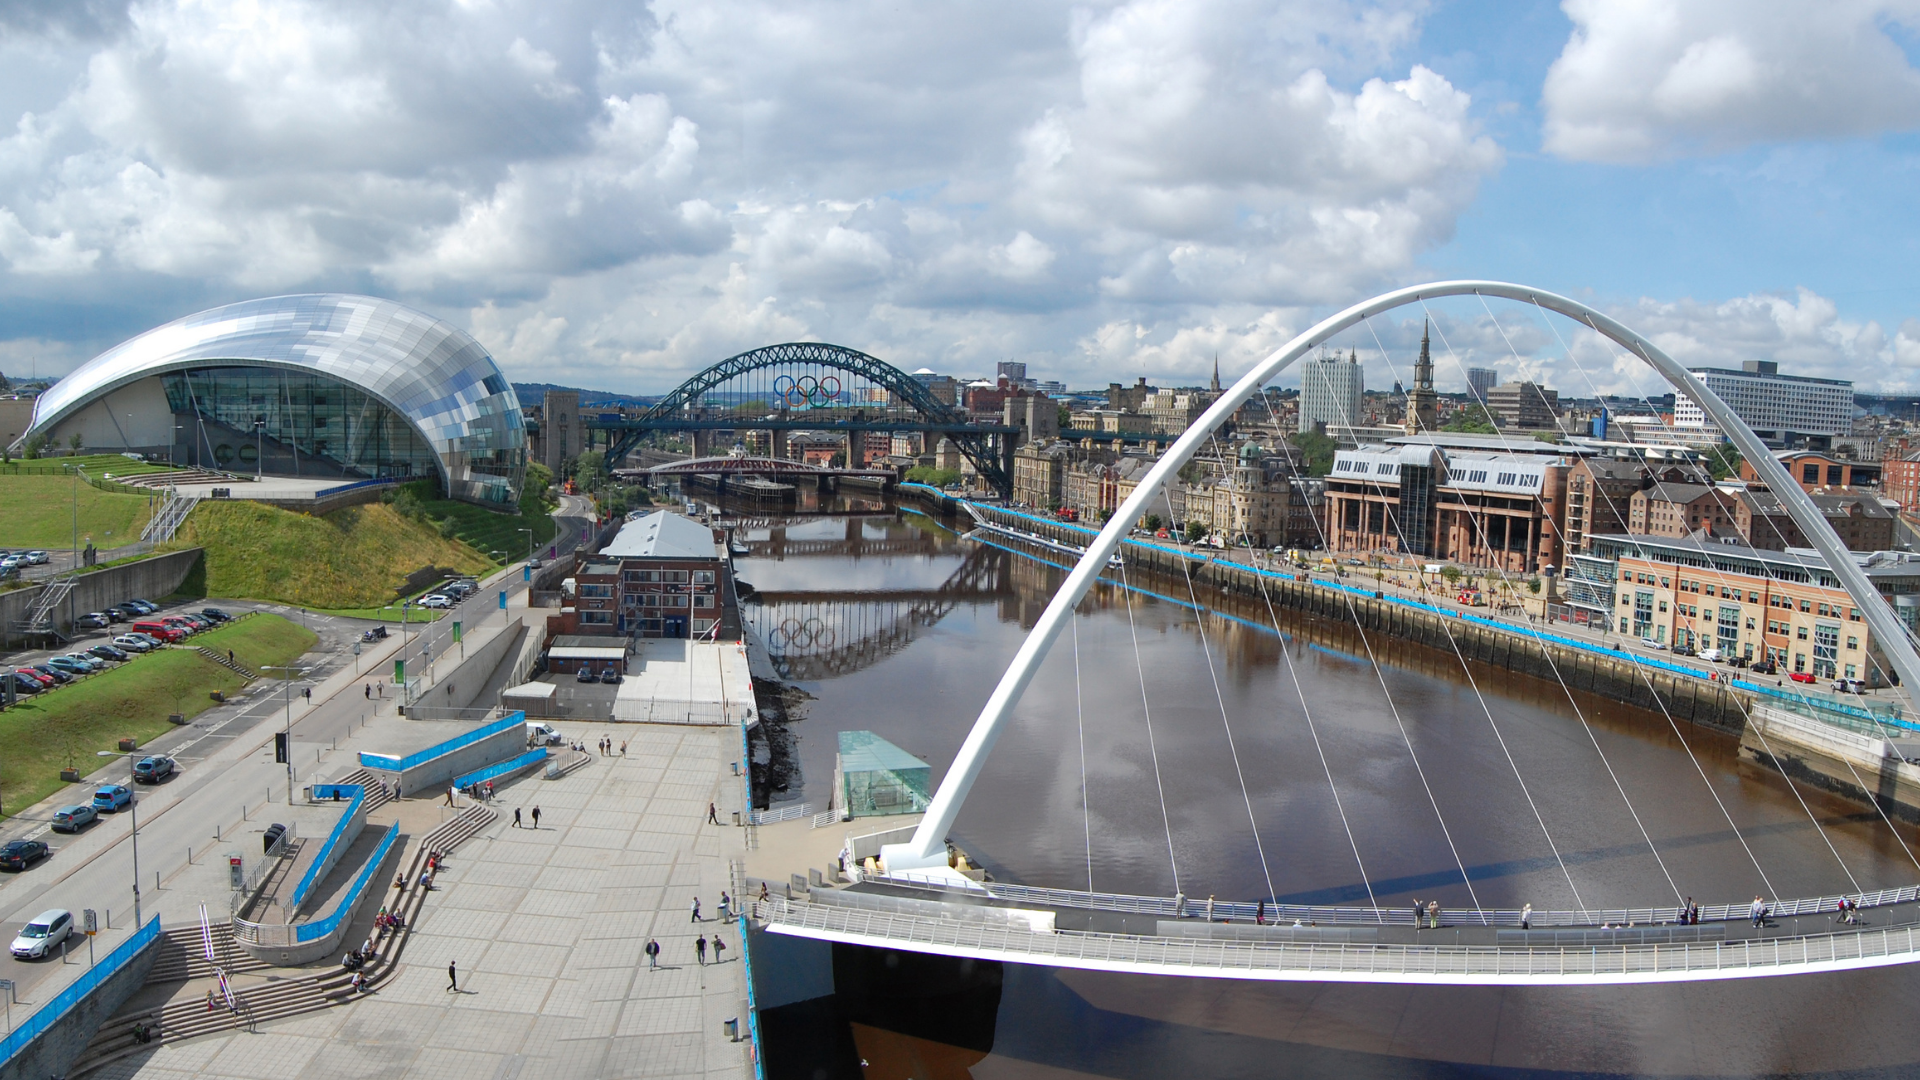 Gateshead Millenium Bridge in Newcastle, which has become the latest city to endorse the Right To Food campaign. Image credit: Hi I’m Santi / Flickr